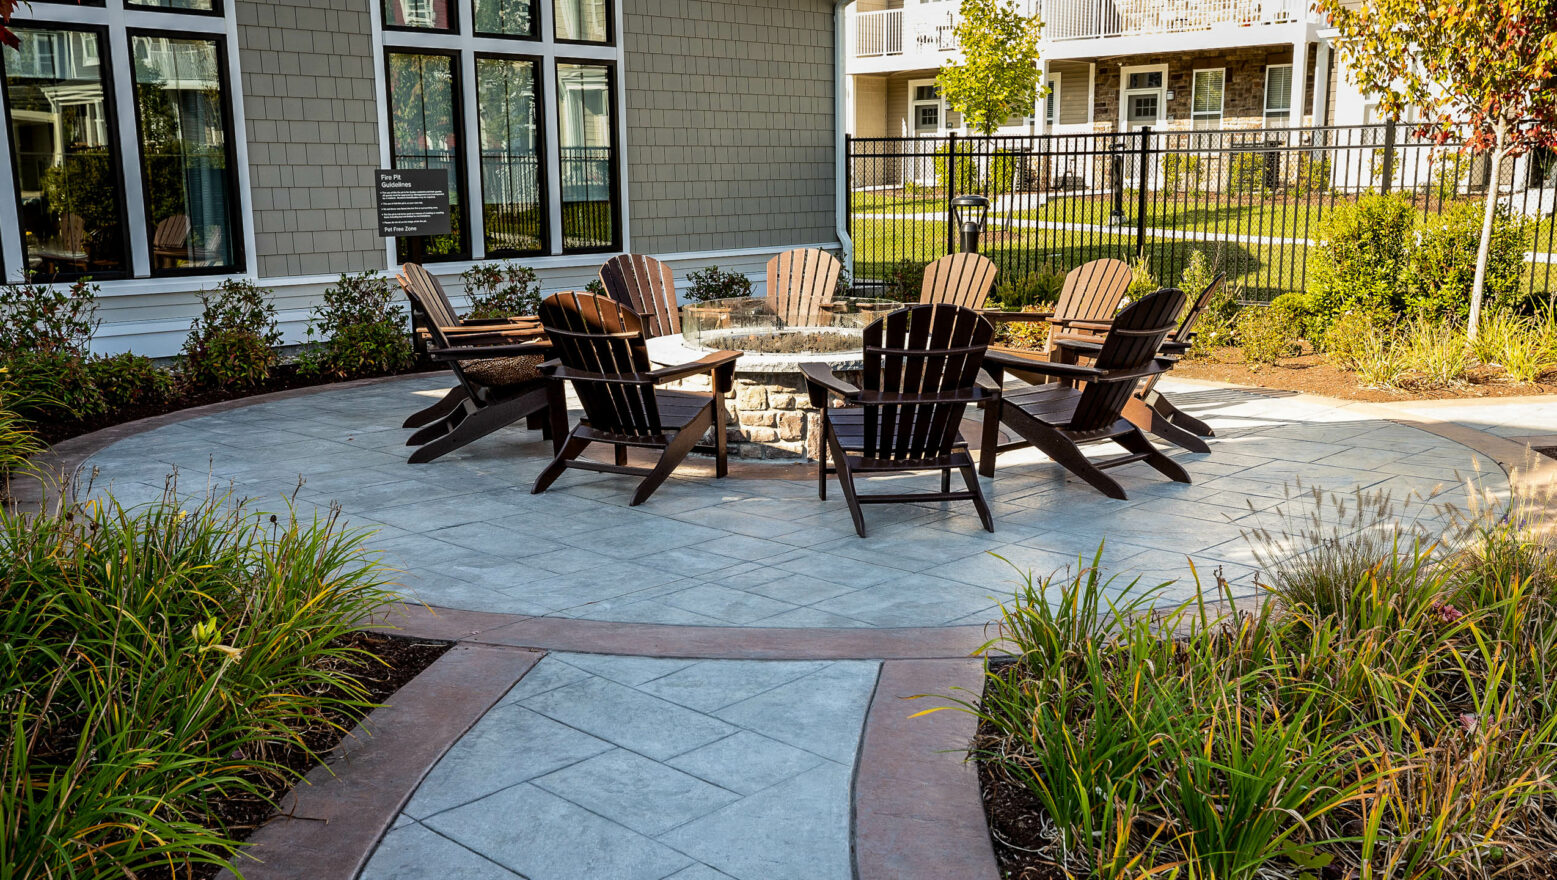 Chairs around a fire pit with stamped and colored concrete patio. Dex by Terra commercial hardscape in MA.